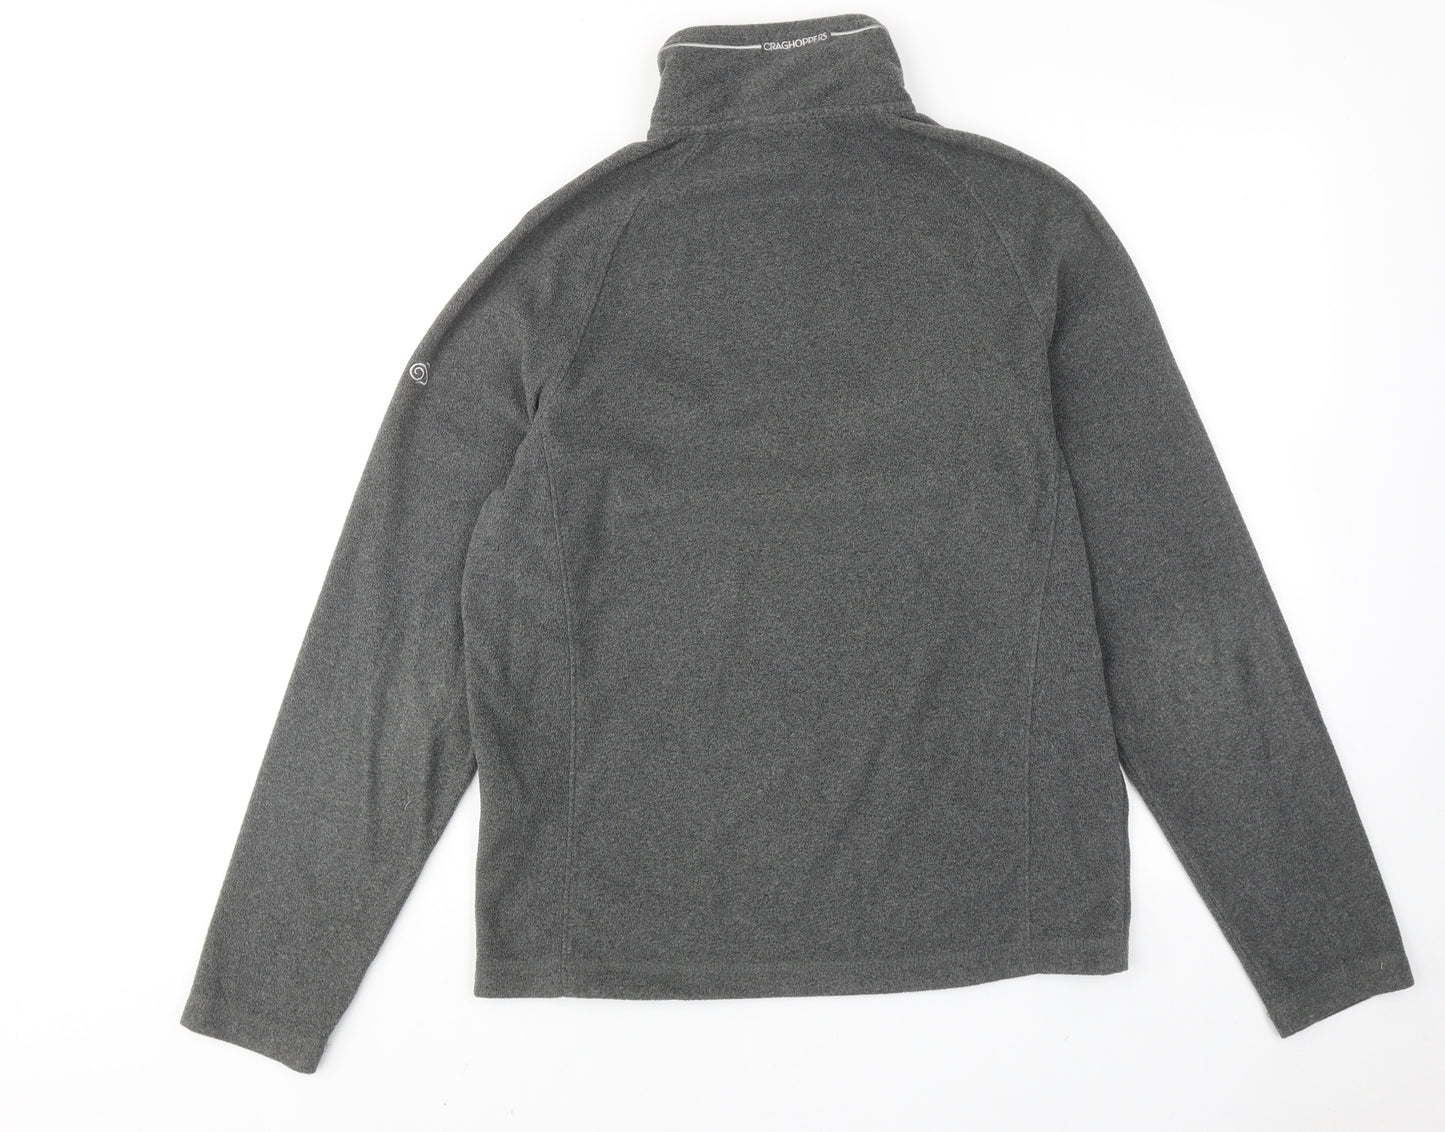 Craghoppers Mens Grey Polyester Pullover Sweatshirt Size S